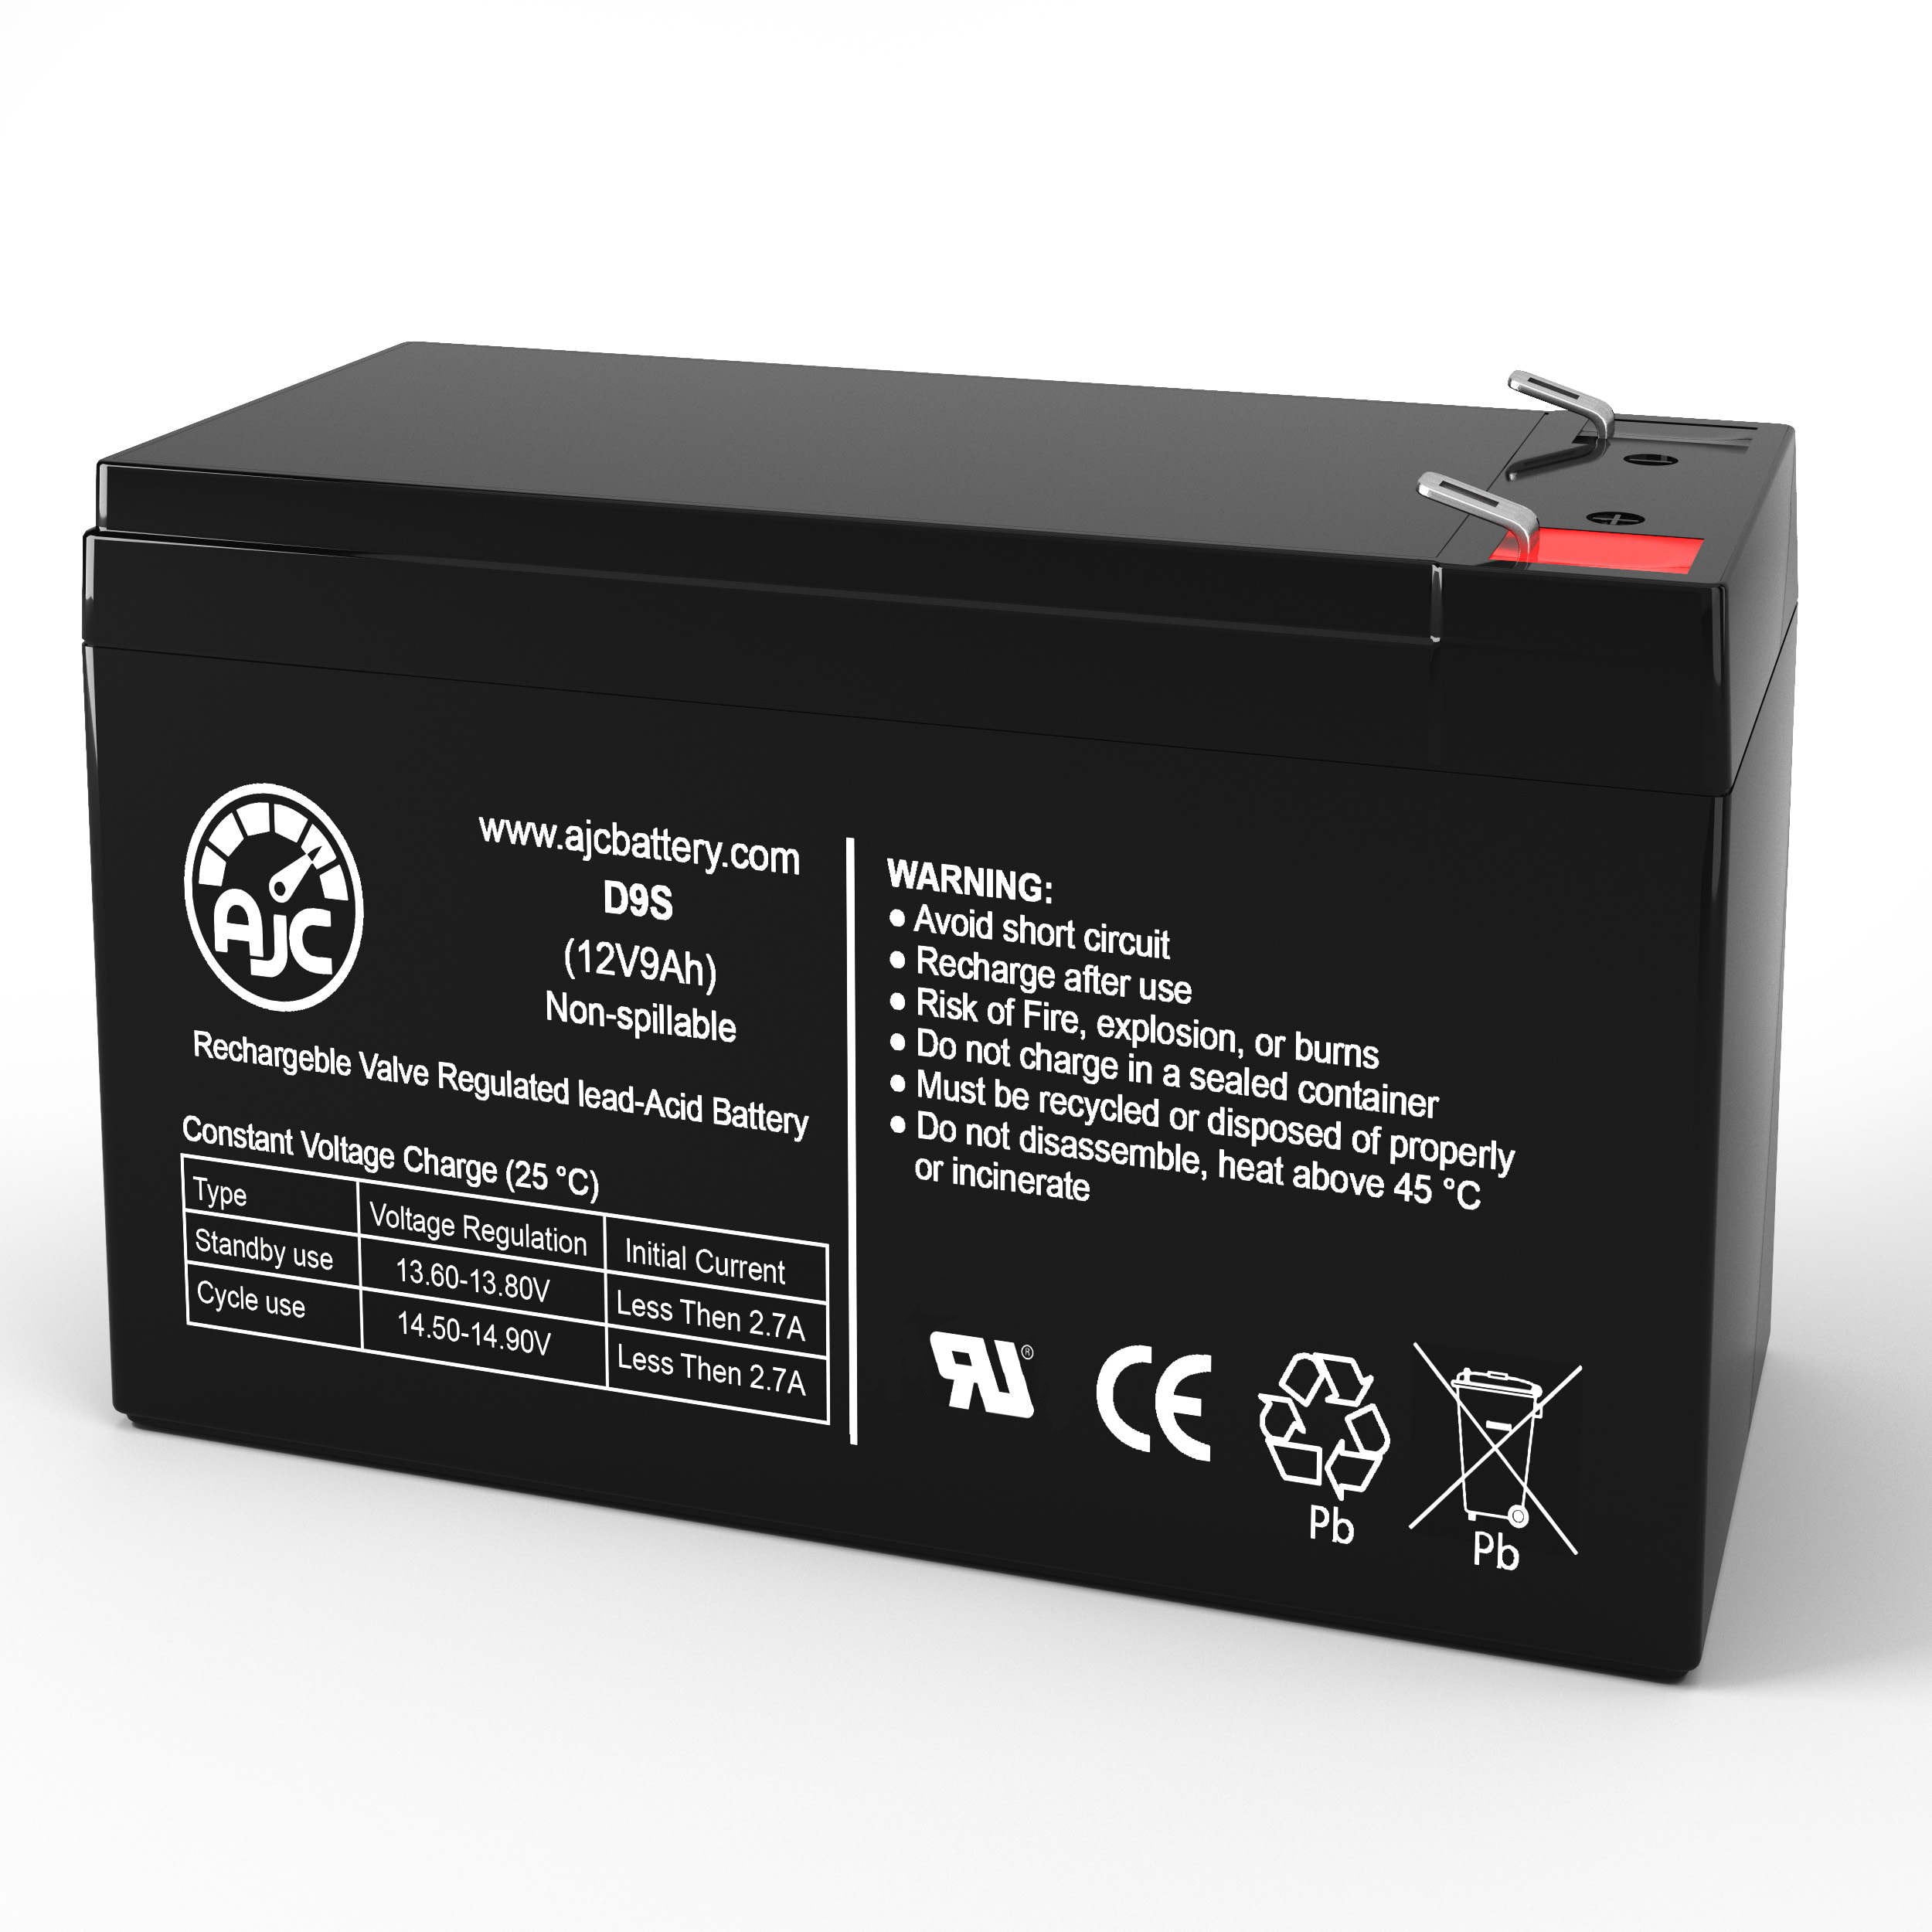 Minuteman Parasystems PRO1500E 12V 9Ah UPS Battery This is an AJC Brand Replacement